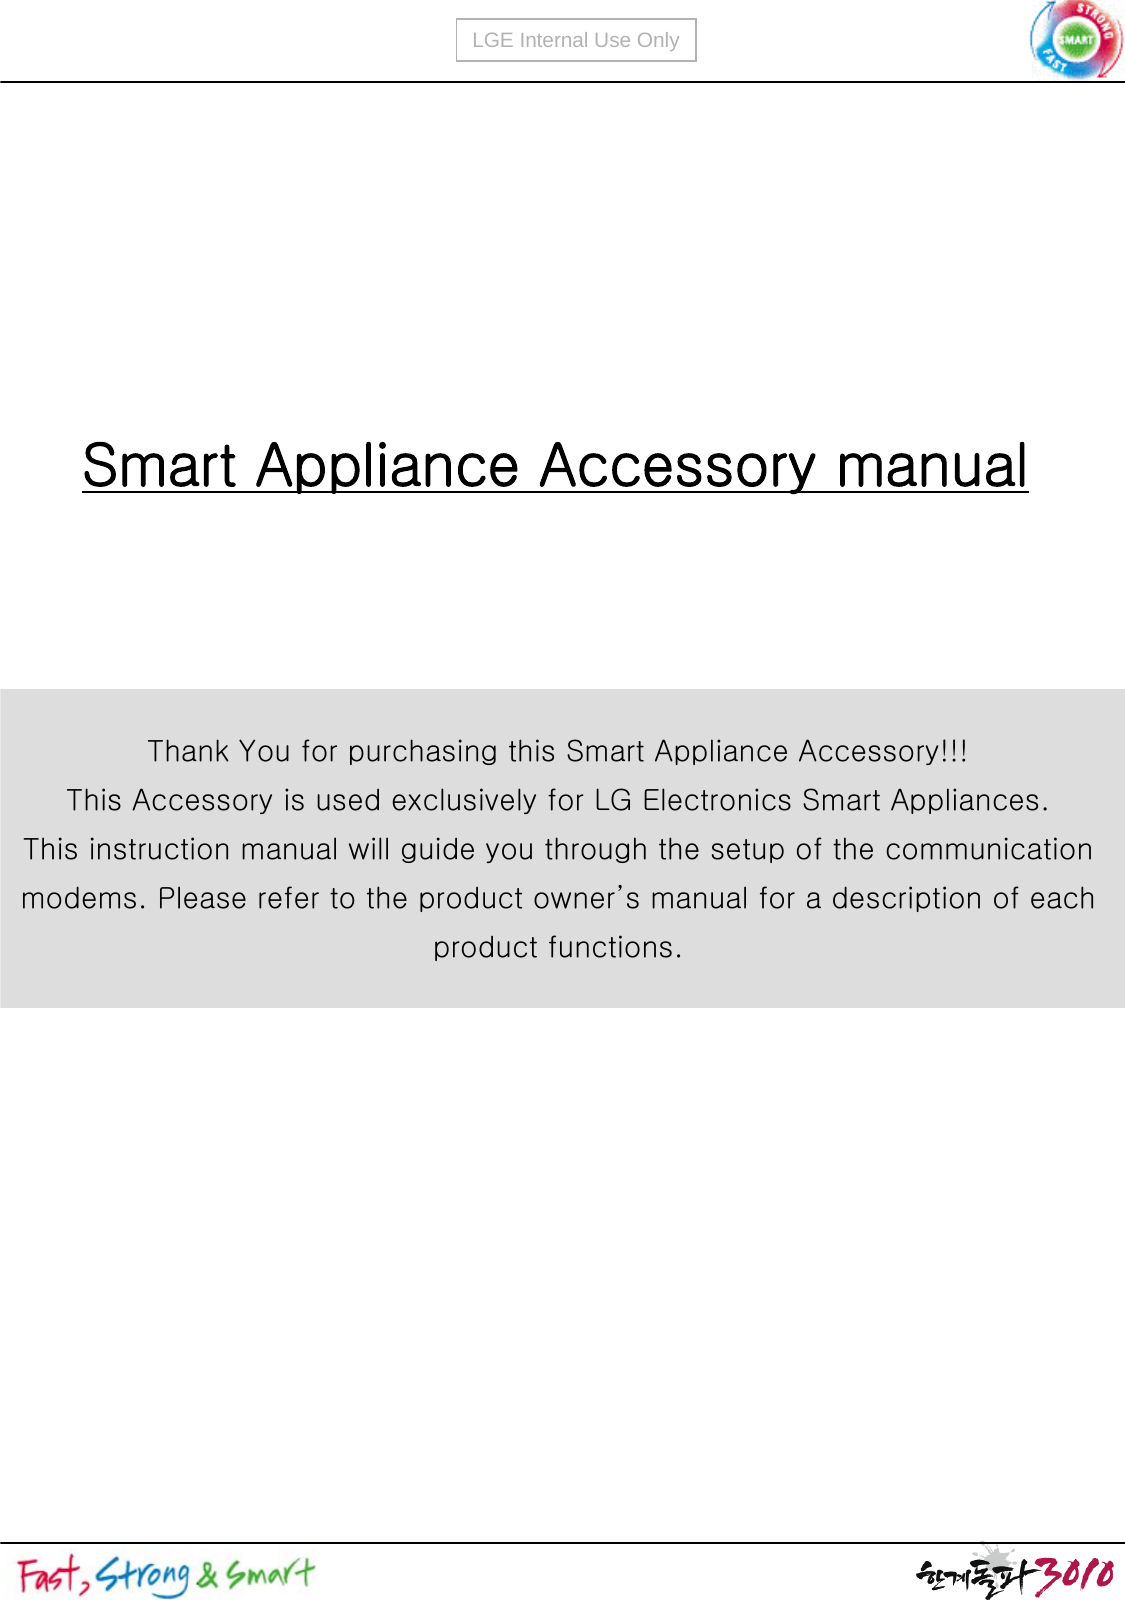 LGE Internal Use OnlySmart Appliance Accessory manualThank You for purchasing this Smart Appliance Accessory!!!This Accessory is used exclusively for LG Electronics Smart Appliances.This instruction manual will guide you through the setup of the communication modems. Please refer to the product owner’s manual for a description of each product functions.